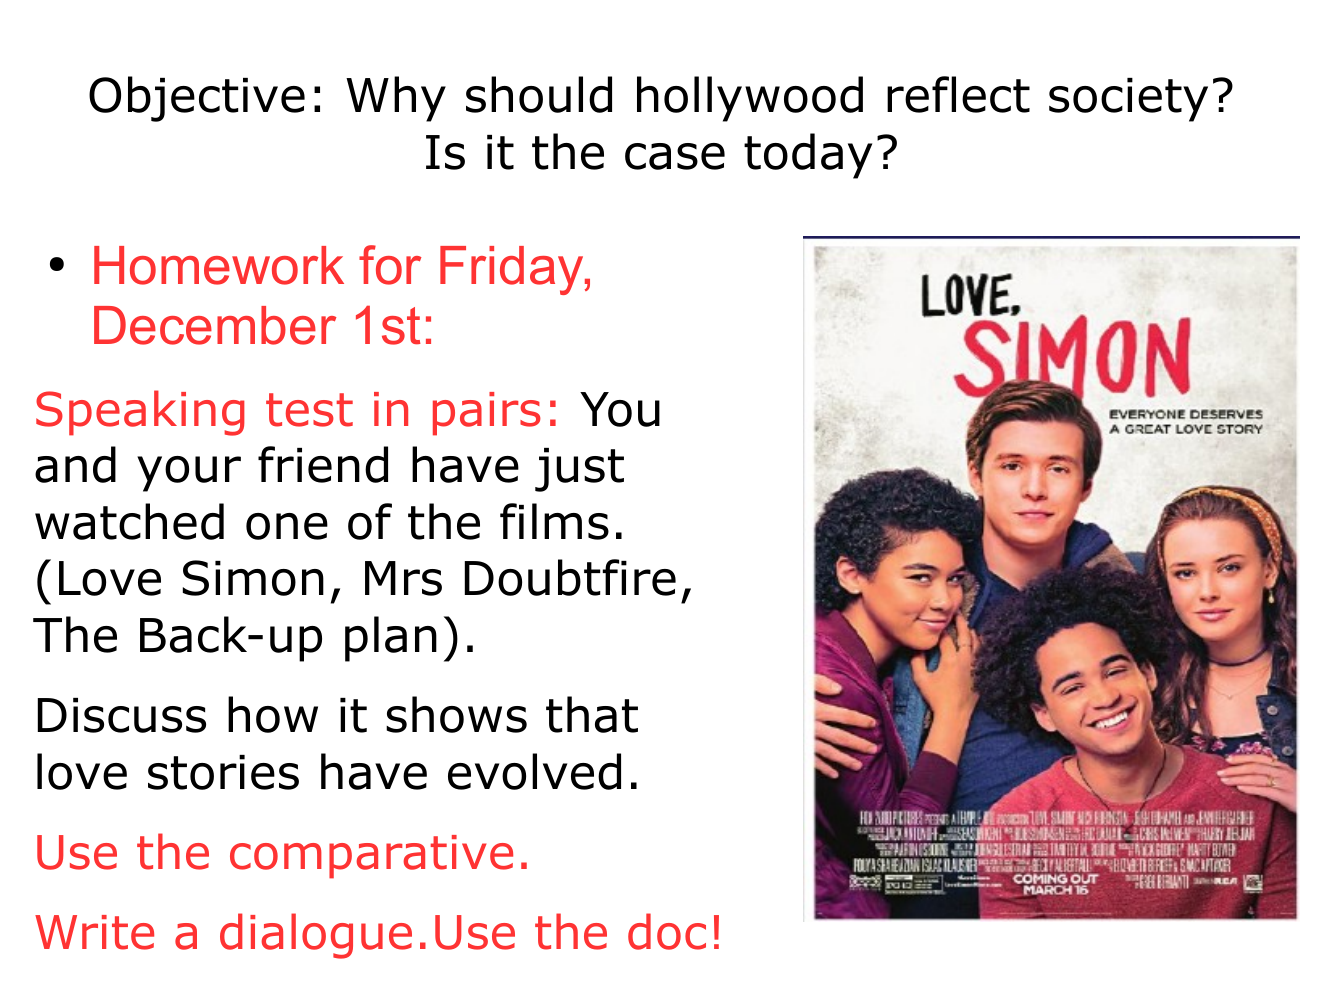 Prévisualisation du document Objective: Why should hollywood reflect society? Is it the case today?